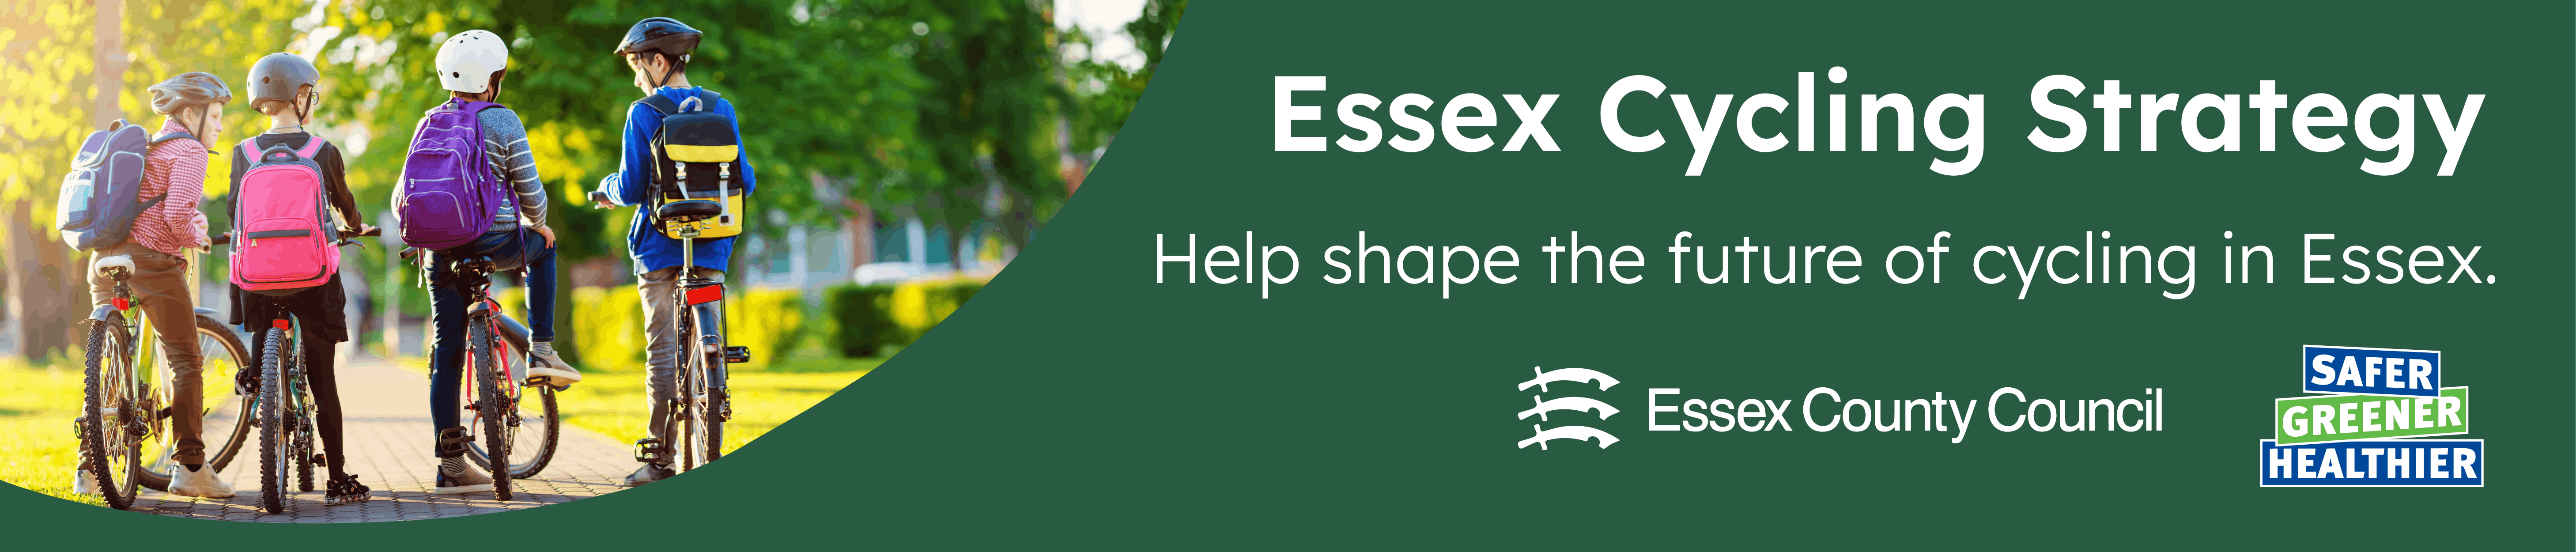 Essex Cycling Strategy banner